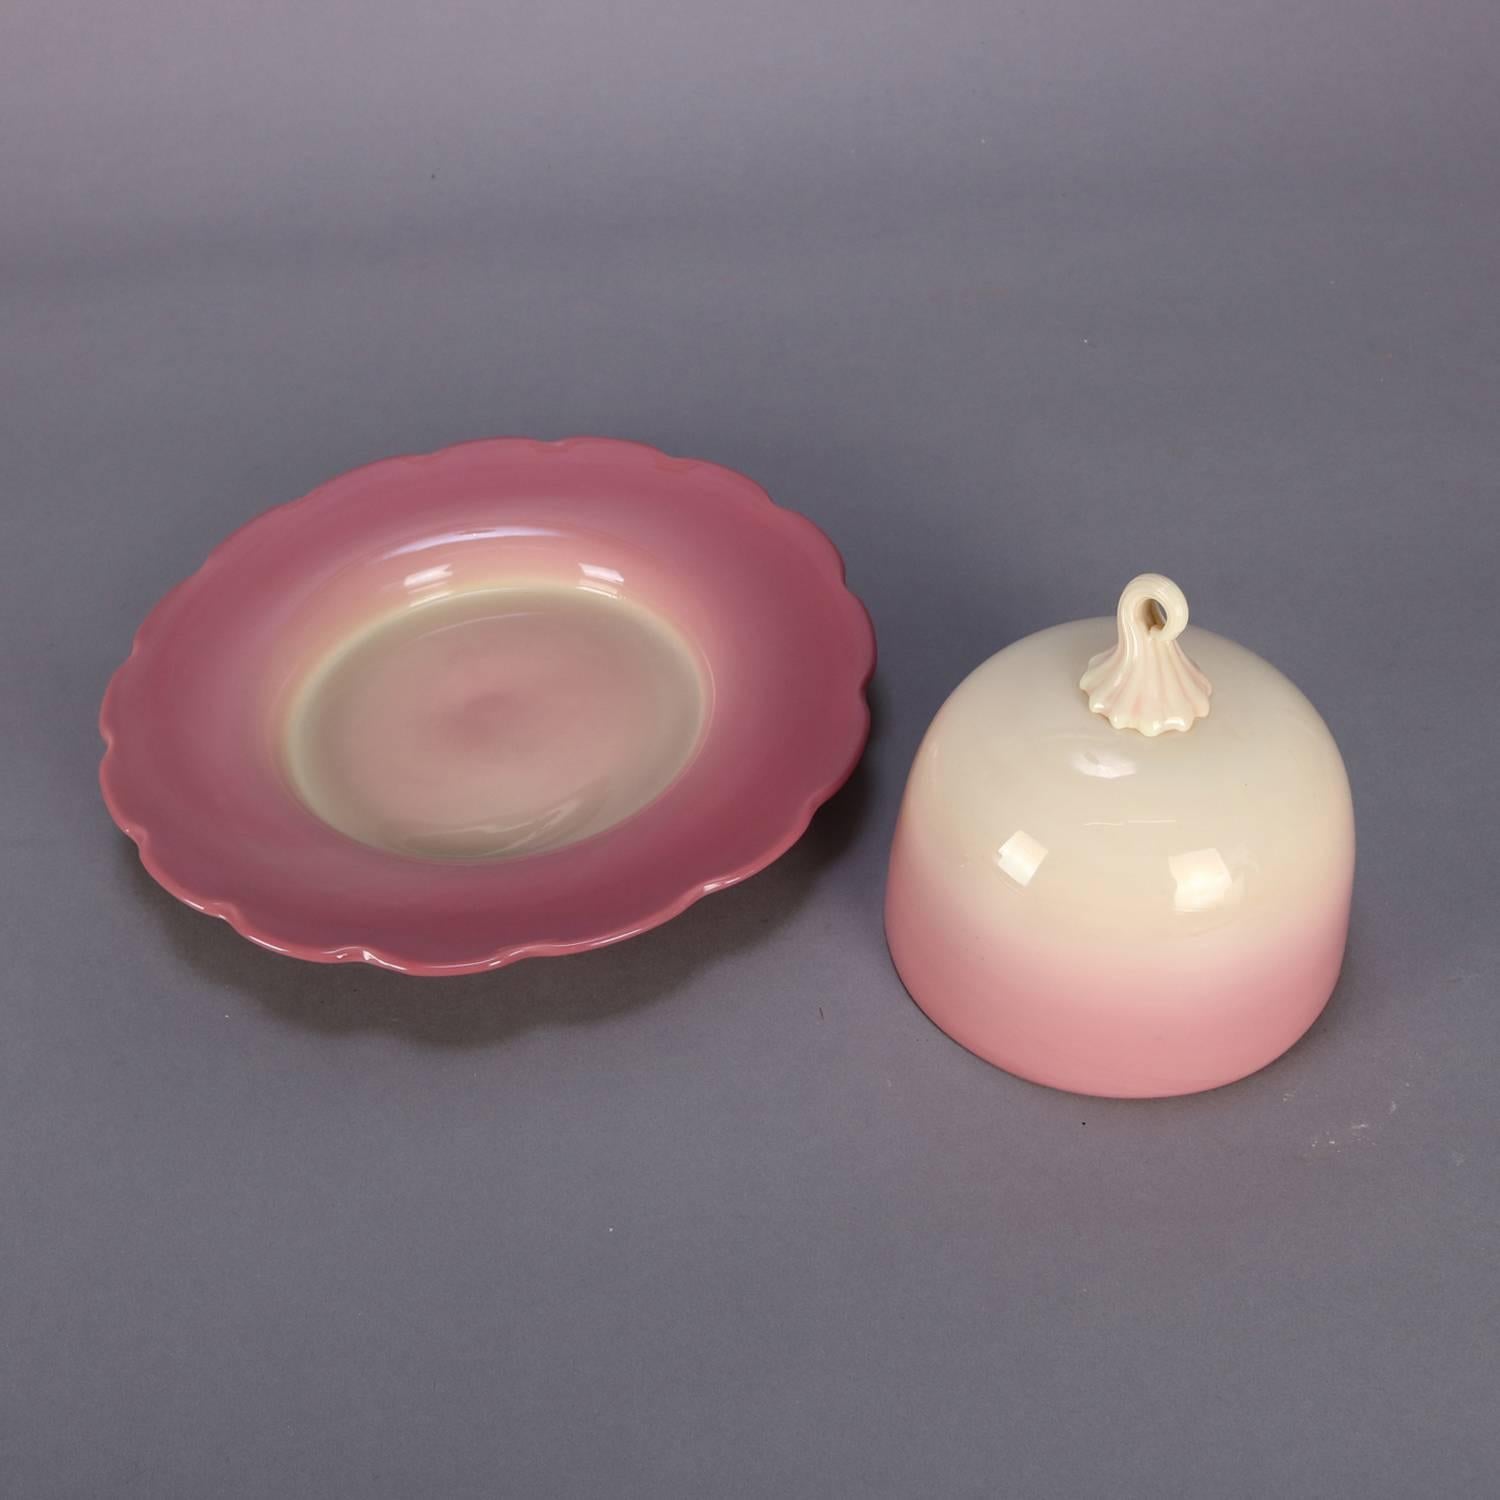 Antique Burmese peach blown art glass lidded butter features dish with scalloped edge and cover with applied handle, shiny finish, circa 1880.
Near perfect condition with one slight manufacturing flaw.

Measures: 5.5